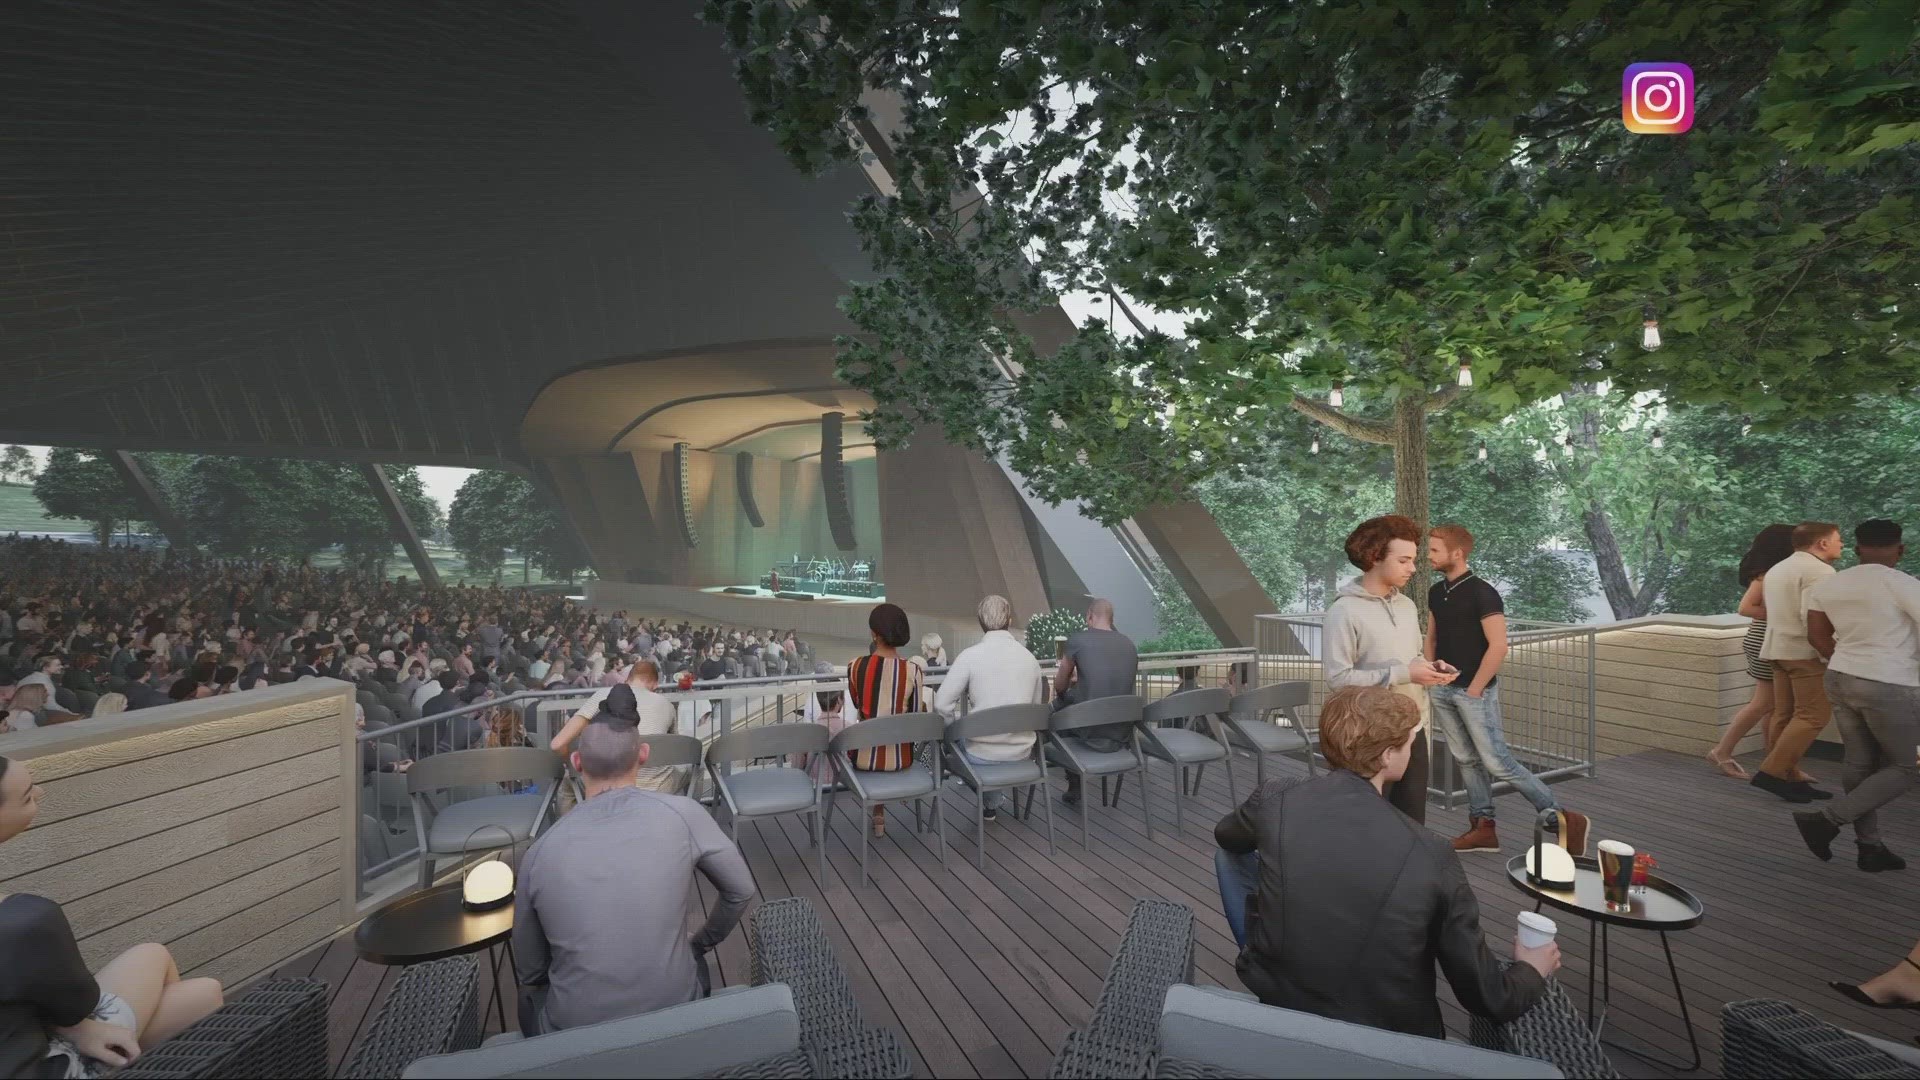 Blossom Music Center has revealed a brand new “Premium Seating” experience is coming soon for the 2023 concert season.